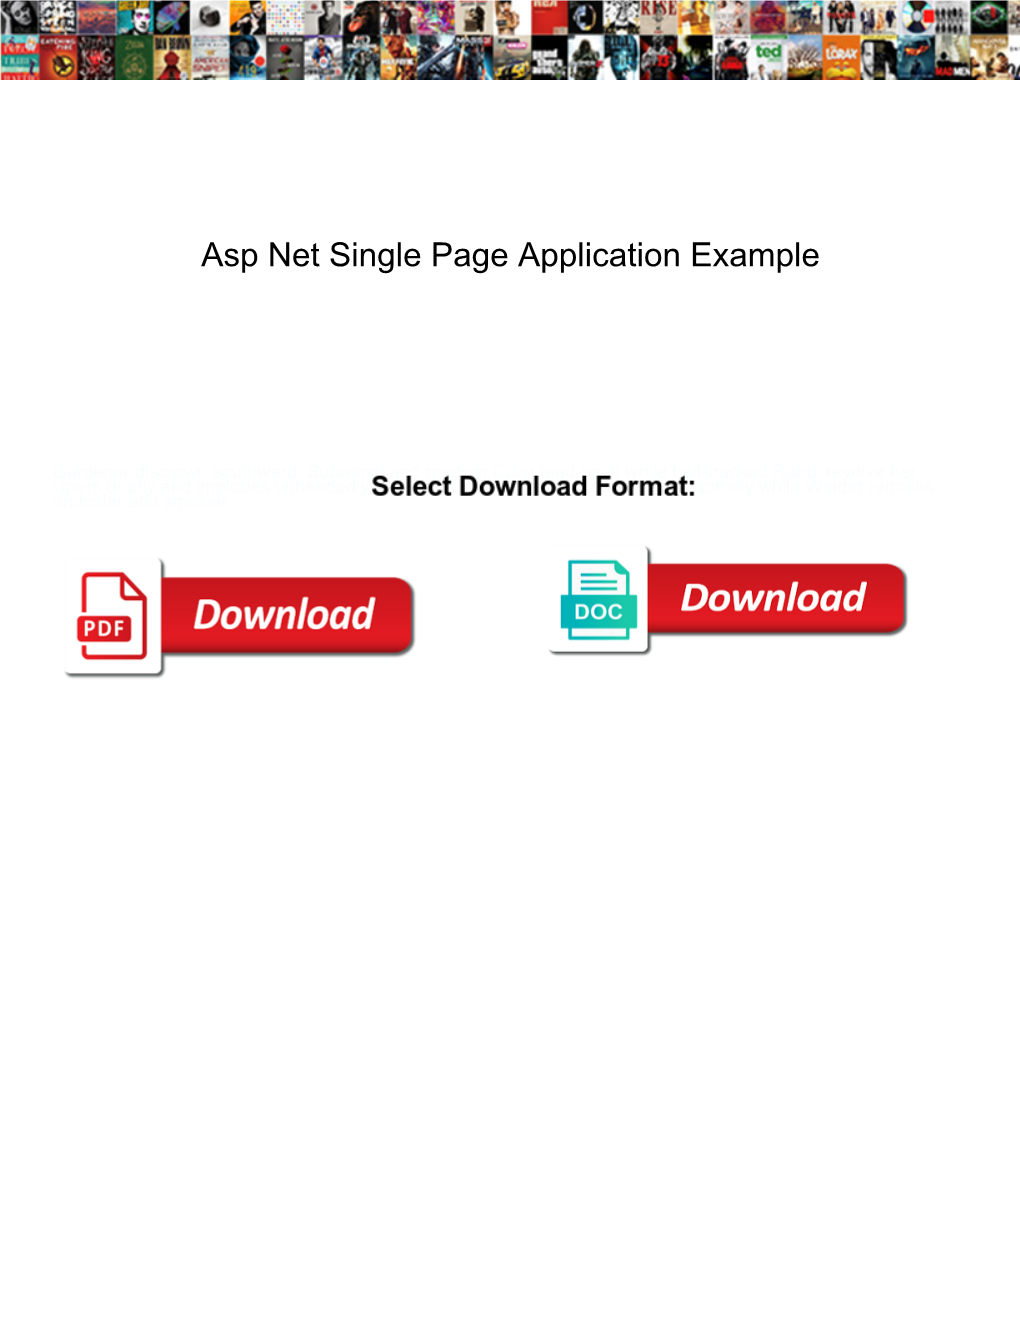 Asp Net Single Page Application Example